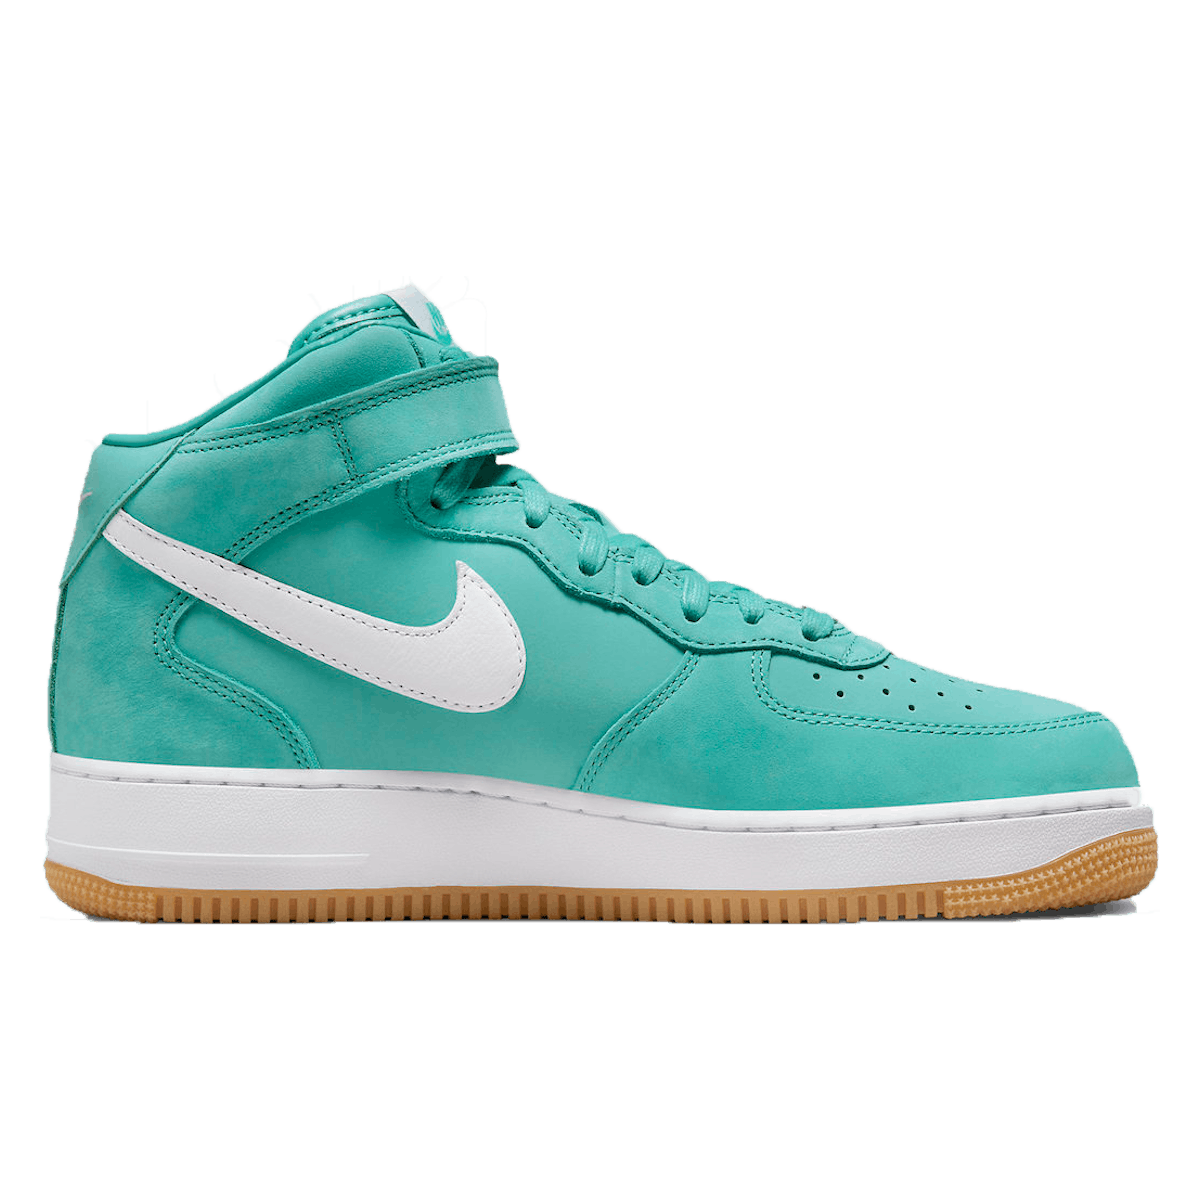 Nike Air Force 1 Mid "Washed Teal"